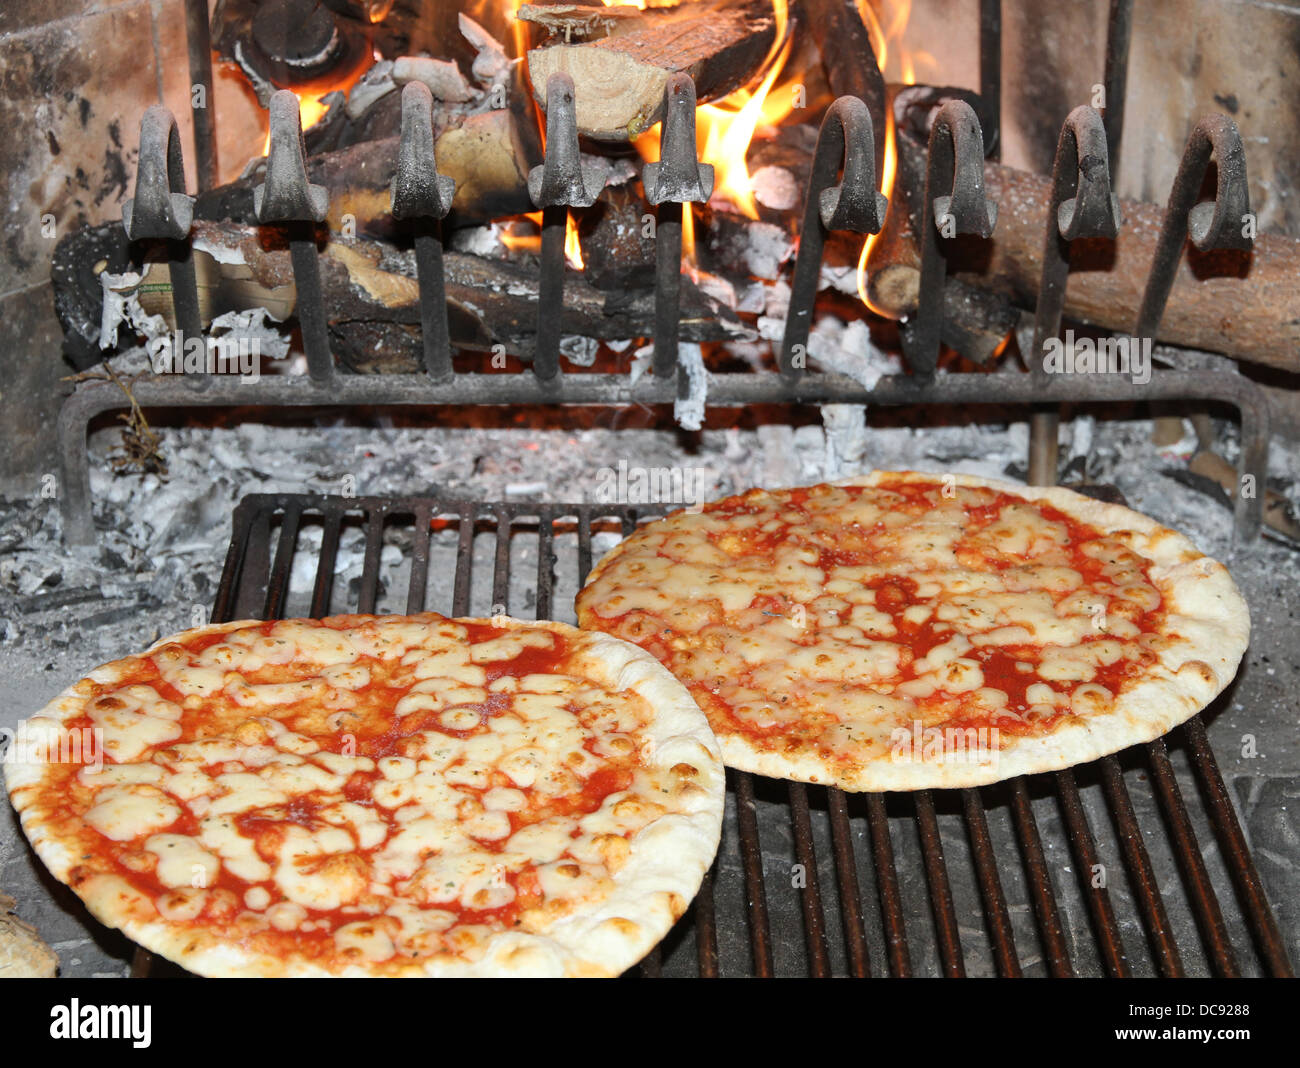 excellent fragrant pizza baked in a wood fireplace with a wood-burning oven pizzeria 4 Stock Photo